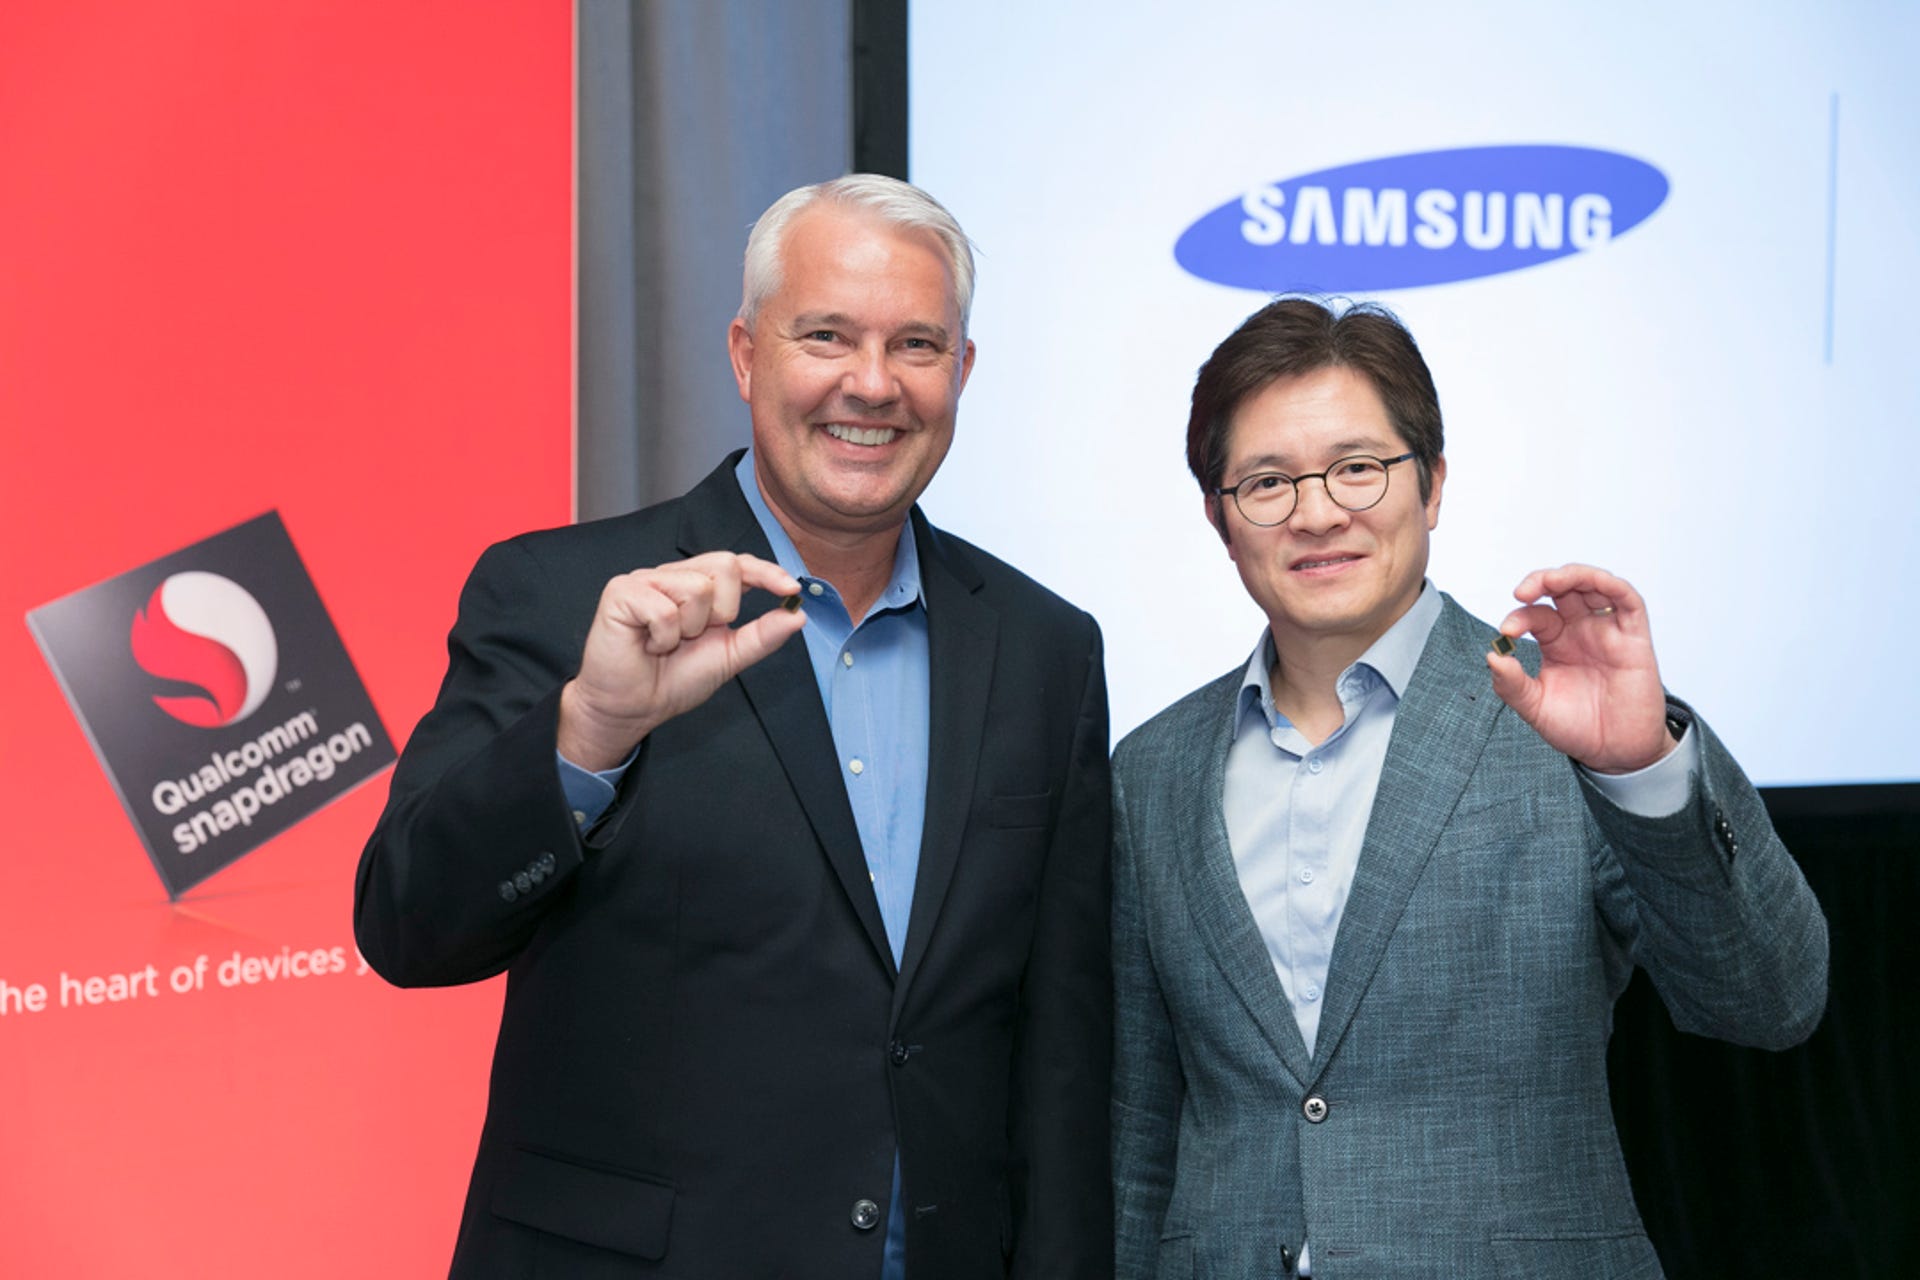 Keith Kressin, left, senior vice president of product management for Qualcomm, and Ben Suh, senior vice president of foundry marketing for Samsung, show off the Snapdragon 835.